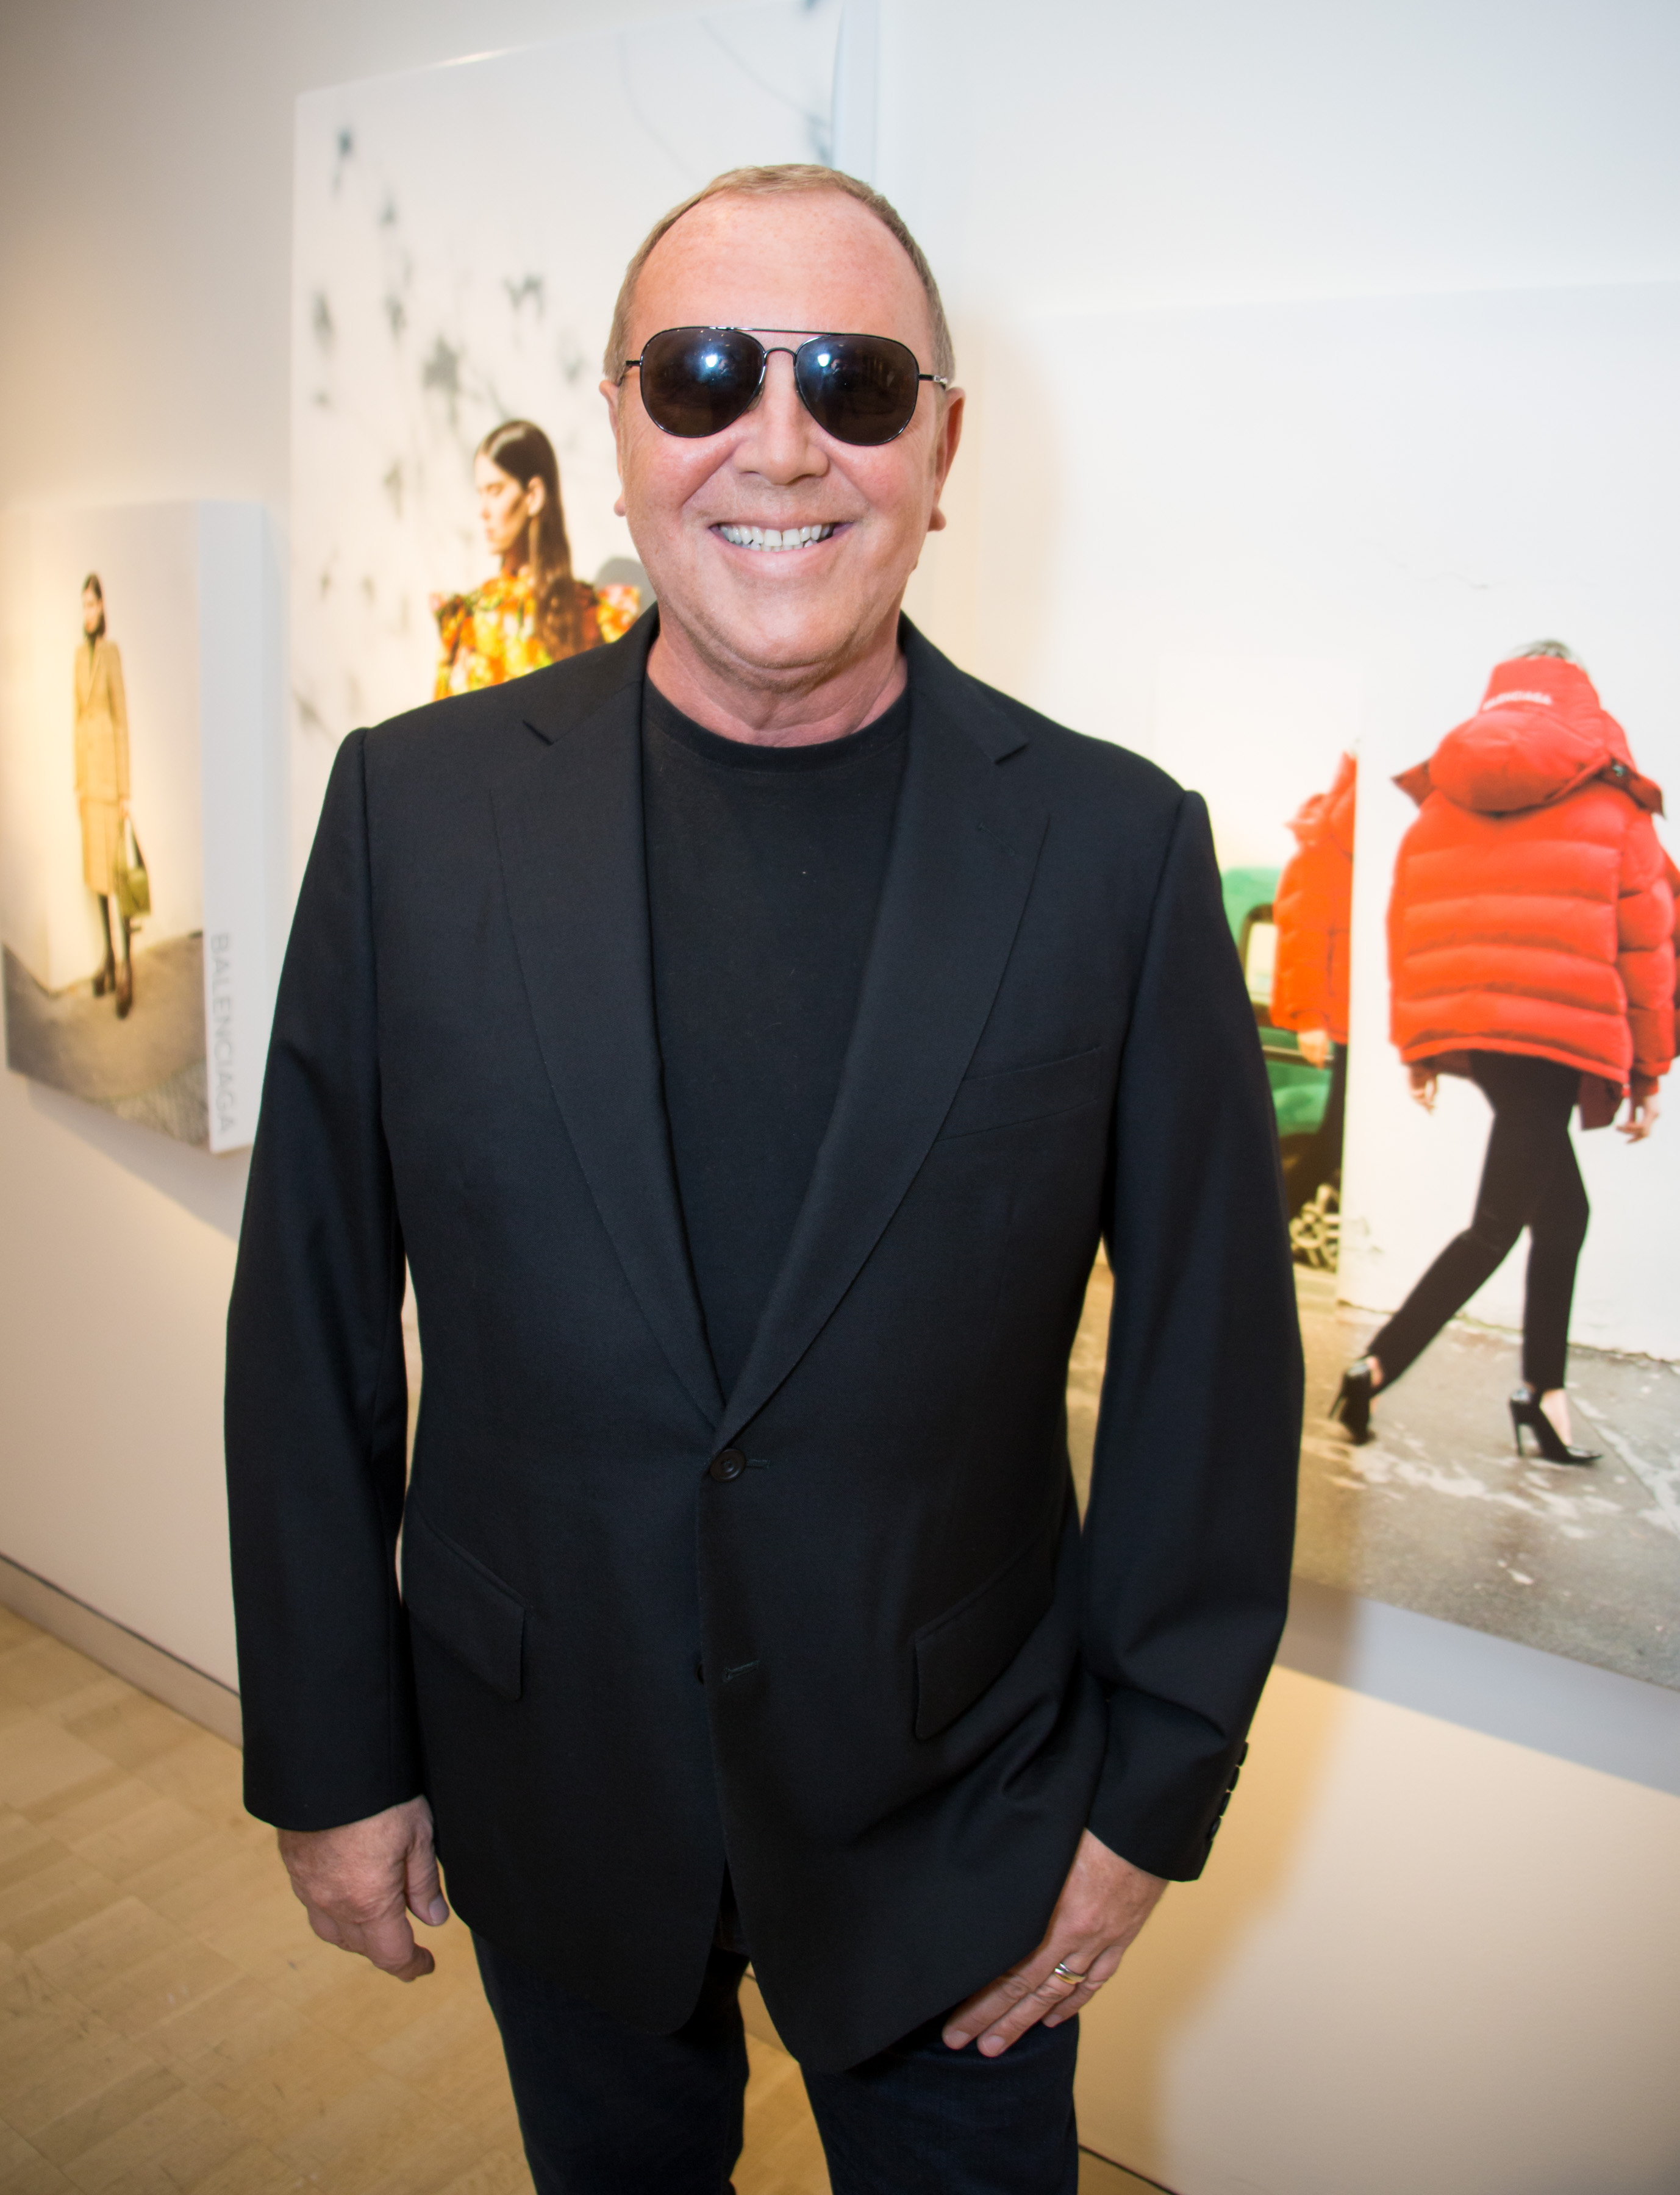 The Michael Kors Flagship is The Store of Your Dreams